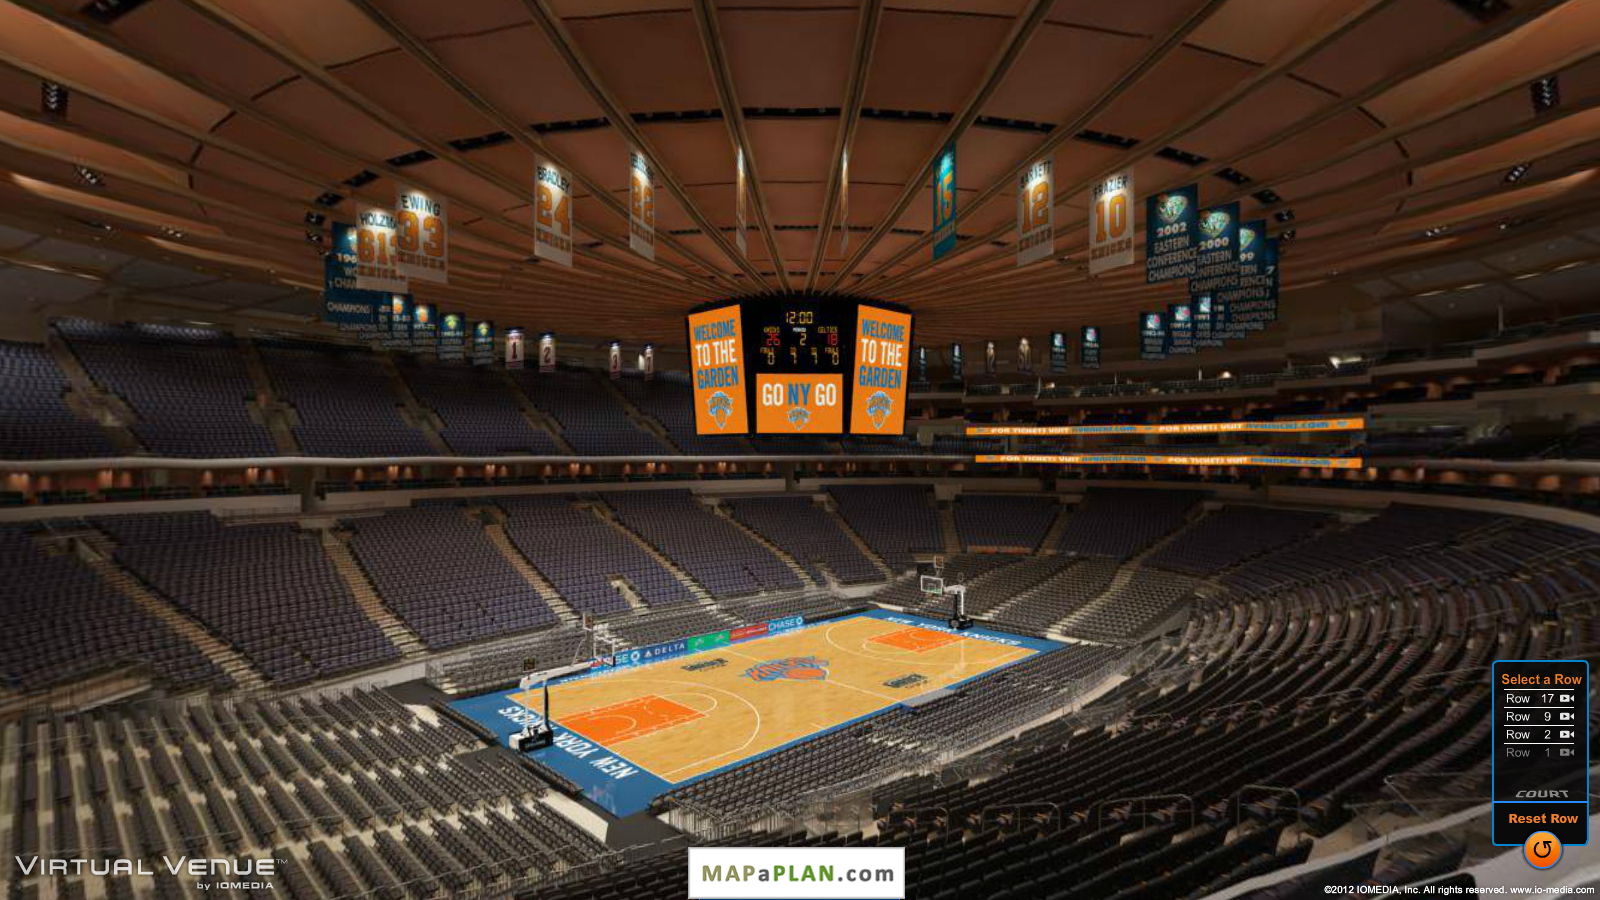 Madison square garden seating chart View from section 221